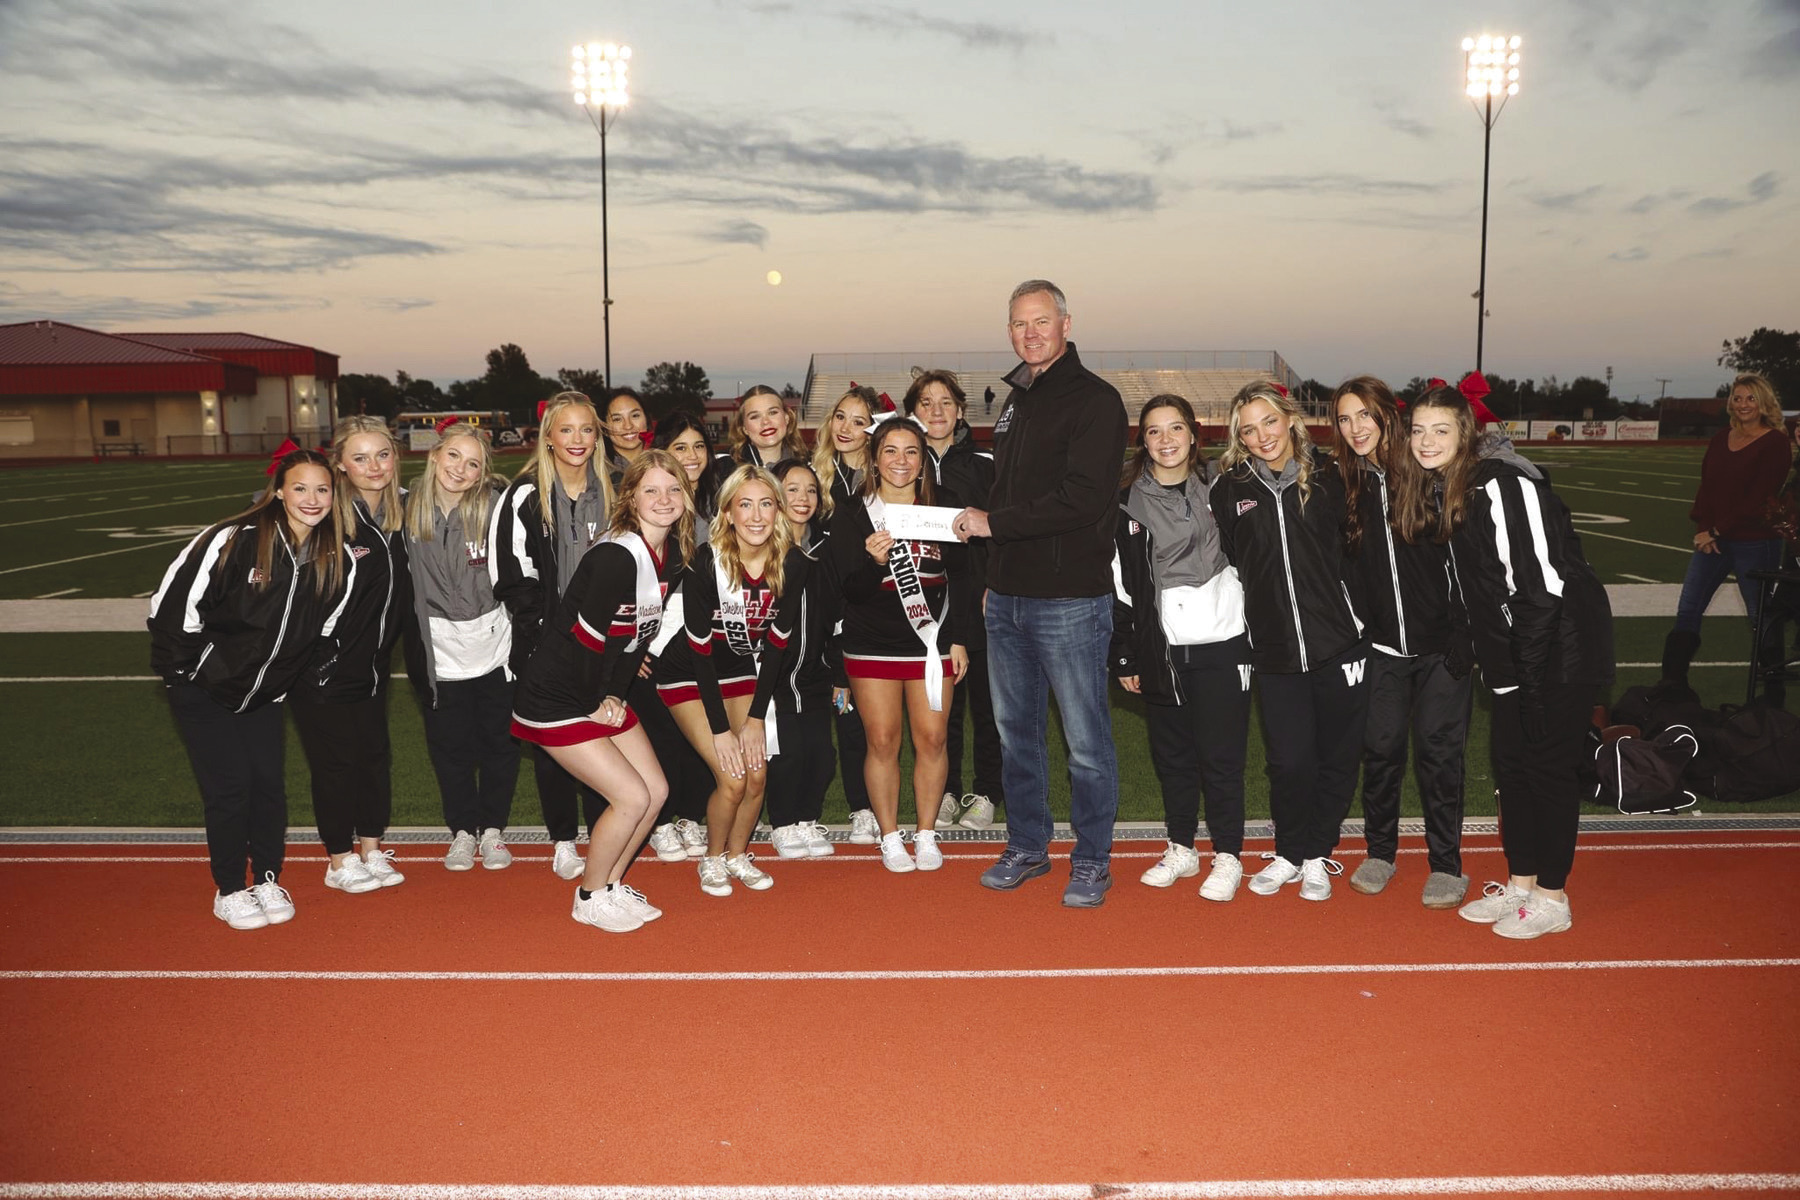 Weatherford cheerleaders raised more than $2,300 and presented a check during Weatherford’s football game Friday night. Photo by Steve Wheeler